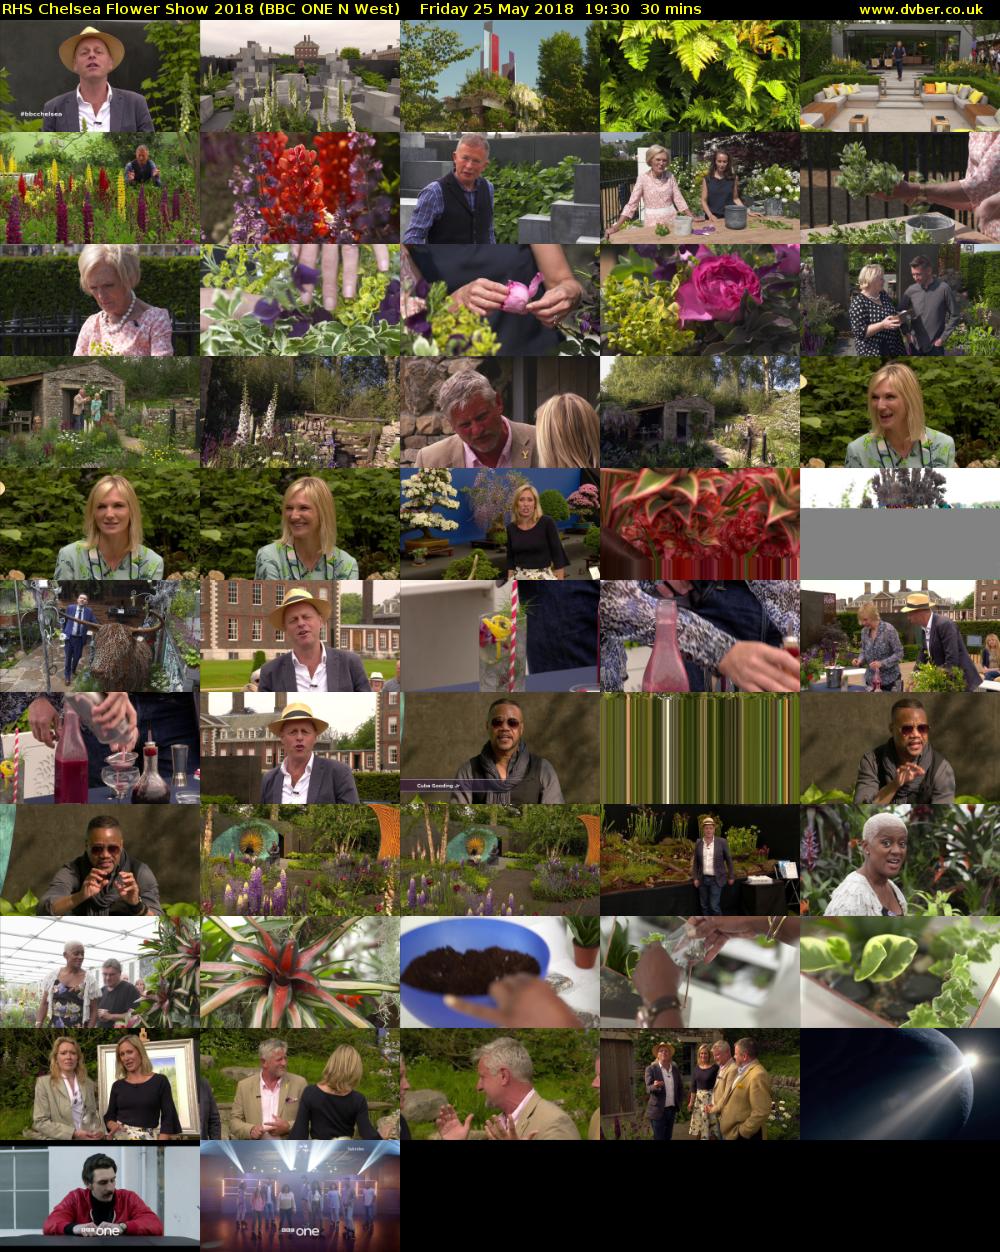 RHS Chelsea Flower Show 2018 (BBC ONE N West) Friday 25 May 2018 19:30 - 20:00